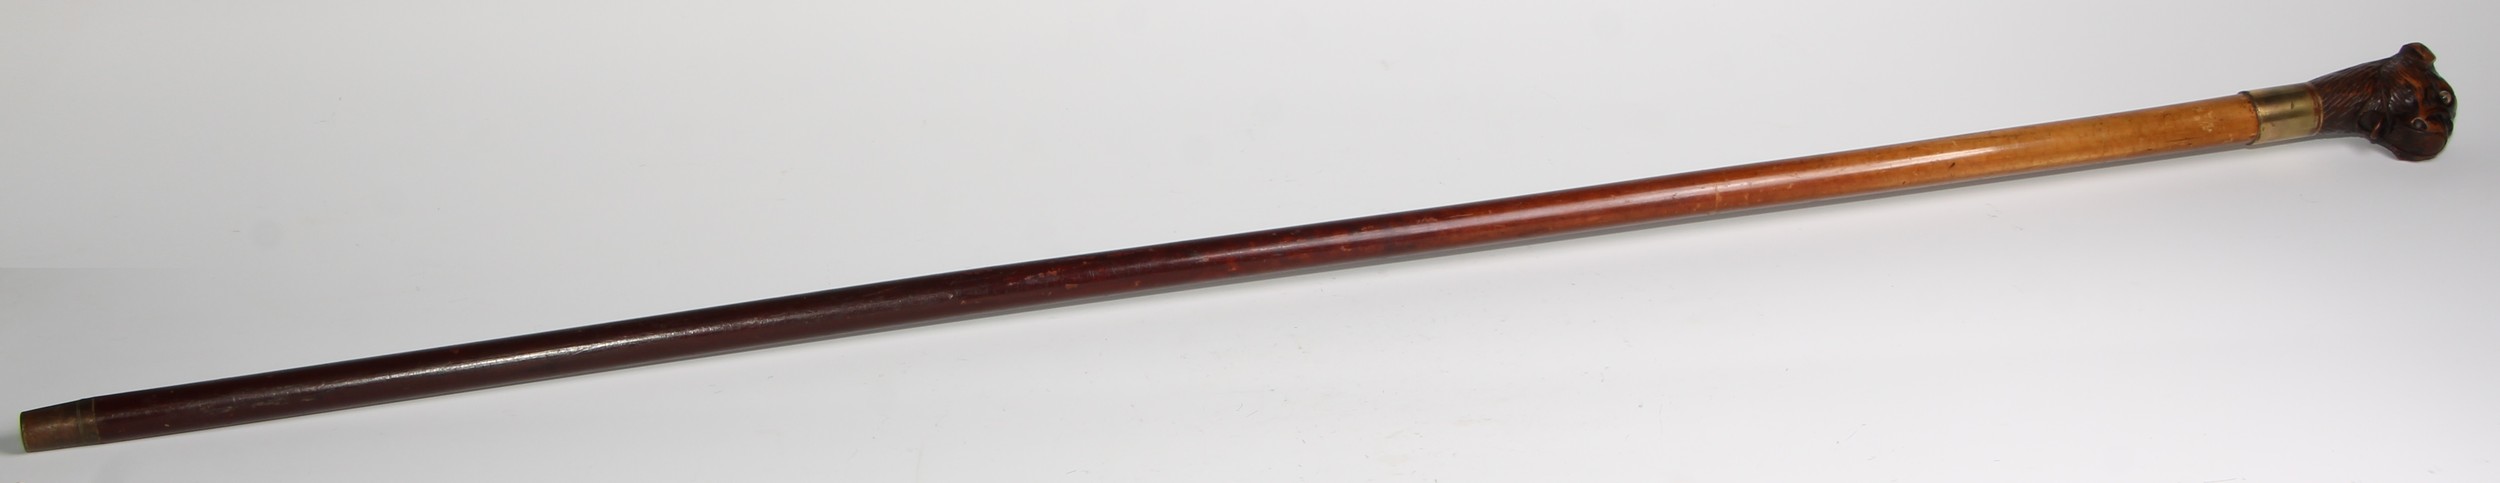 A late 19th century novelty automaton walking stick, the Black Forest type pommel carved as the head - Image 2 of 6